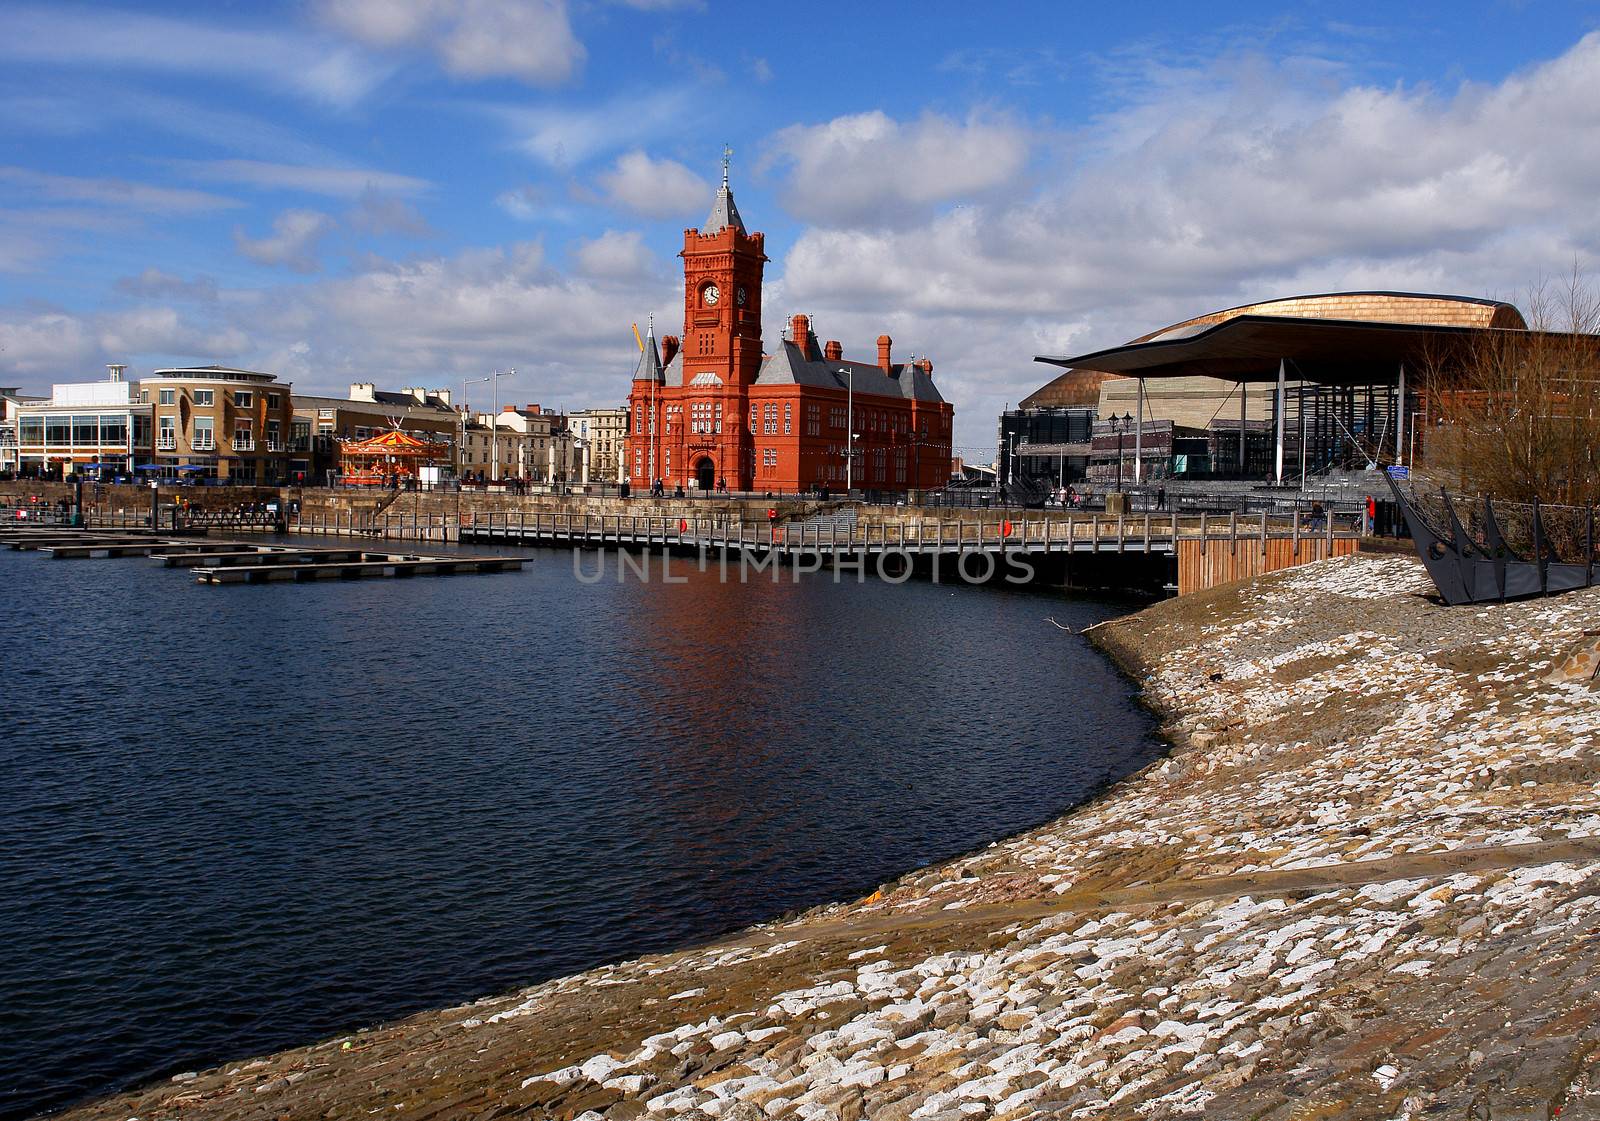 Cardiff bay overview by ptxgarfield